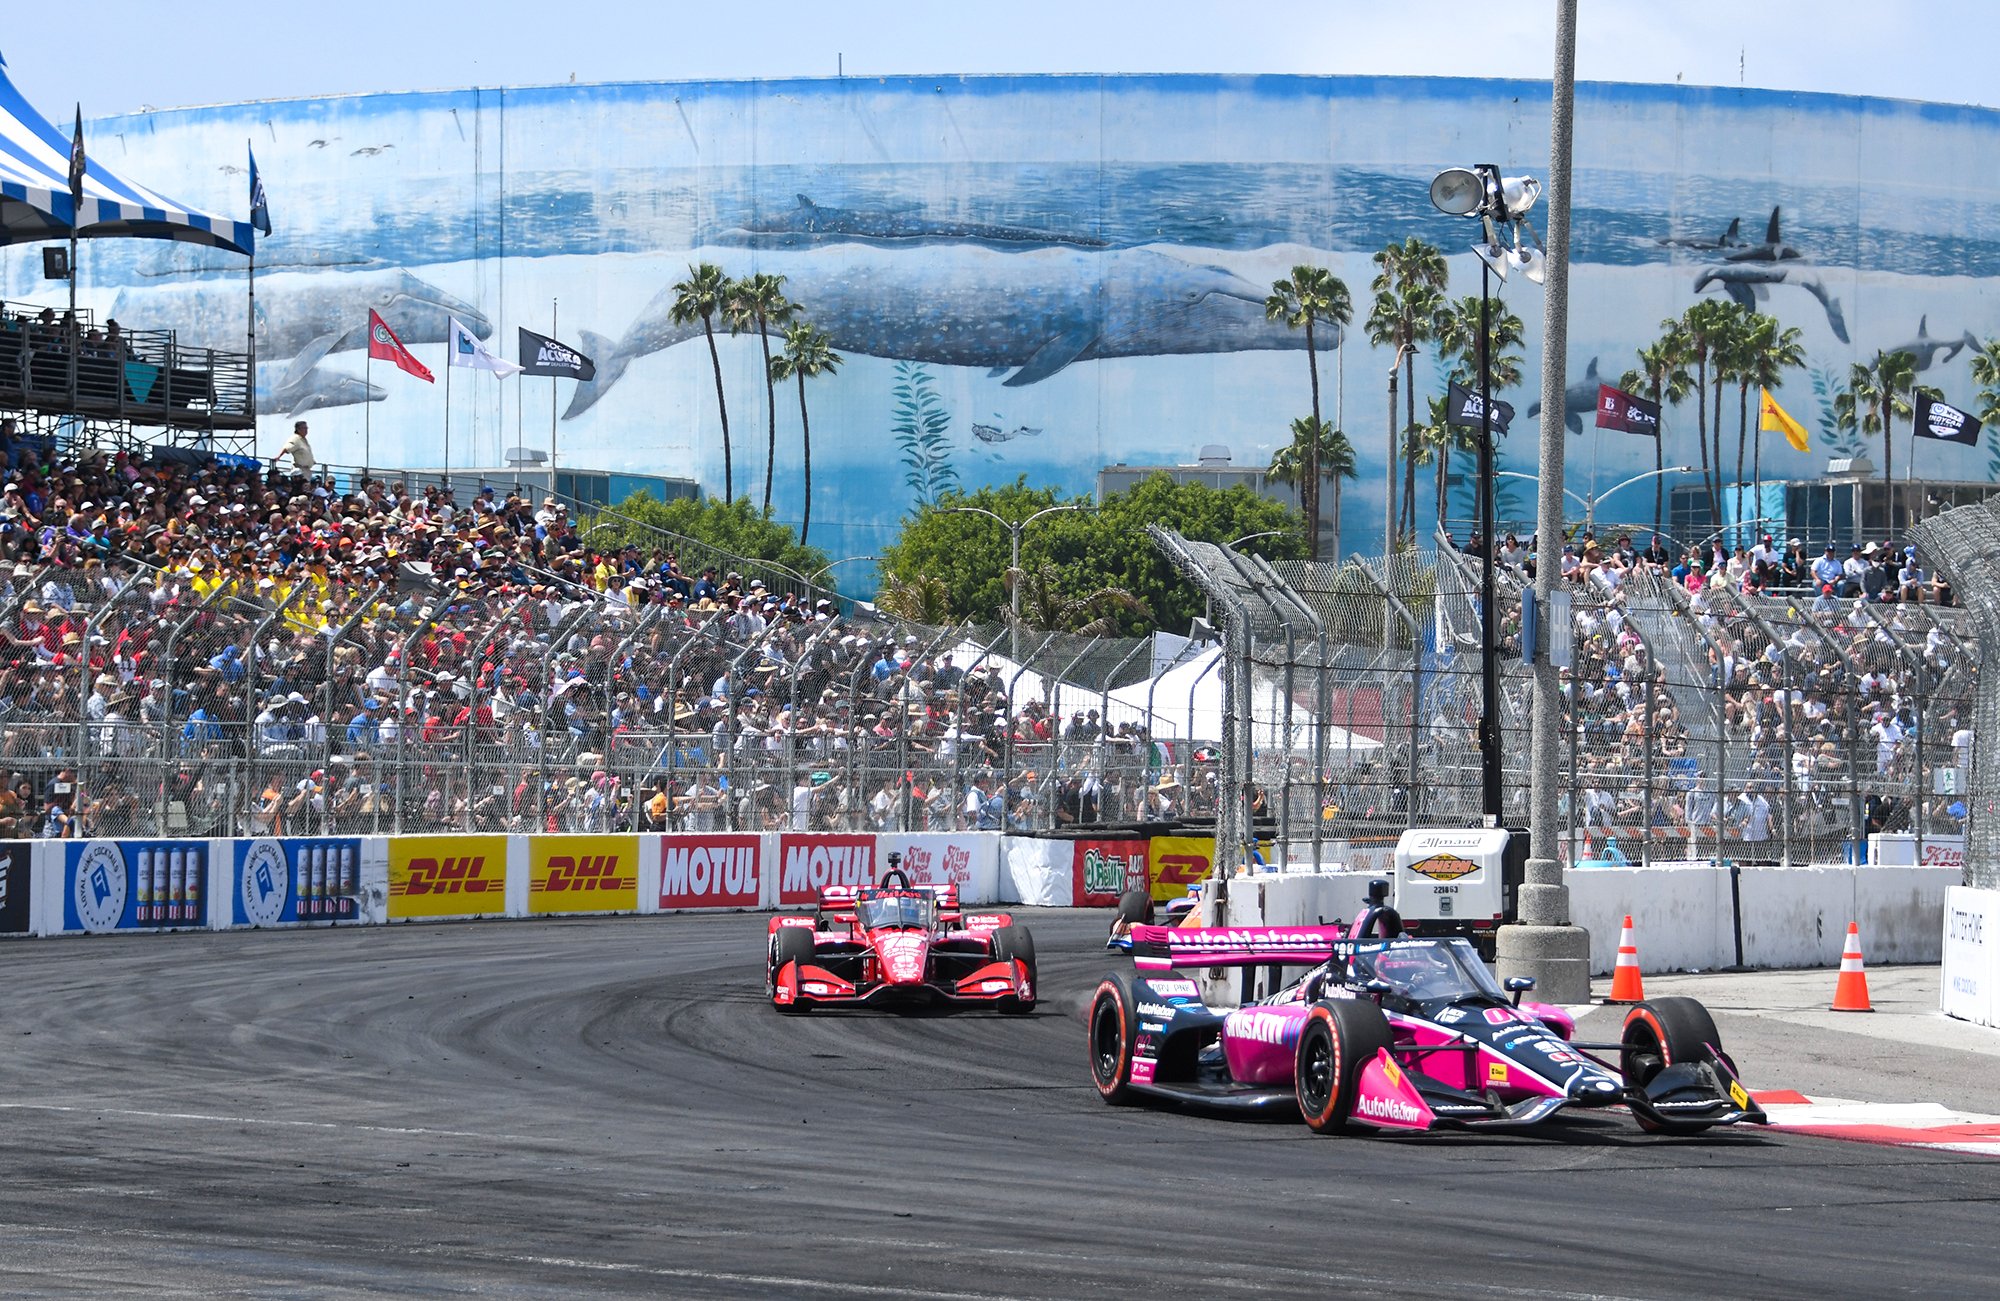 Committee of 300 from Acura Grand Prix of Long Beach